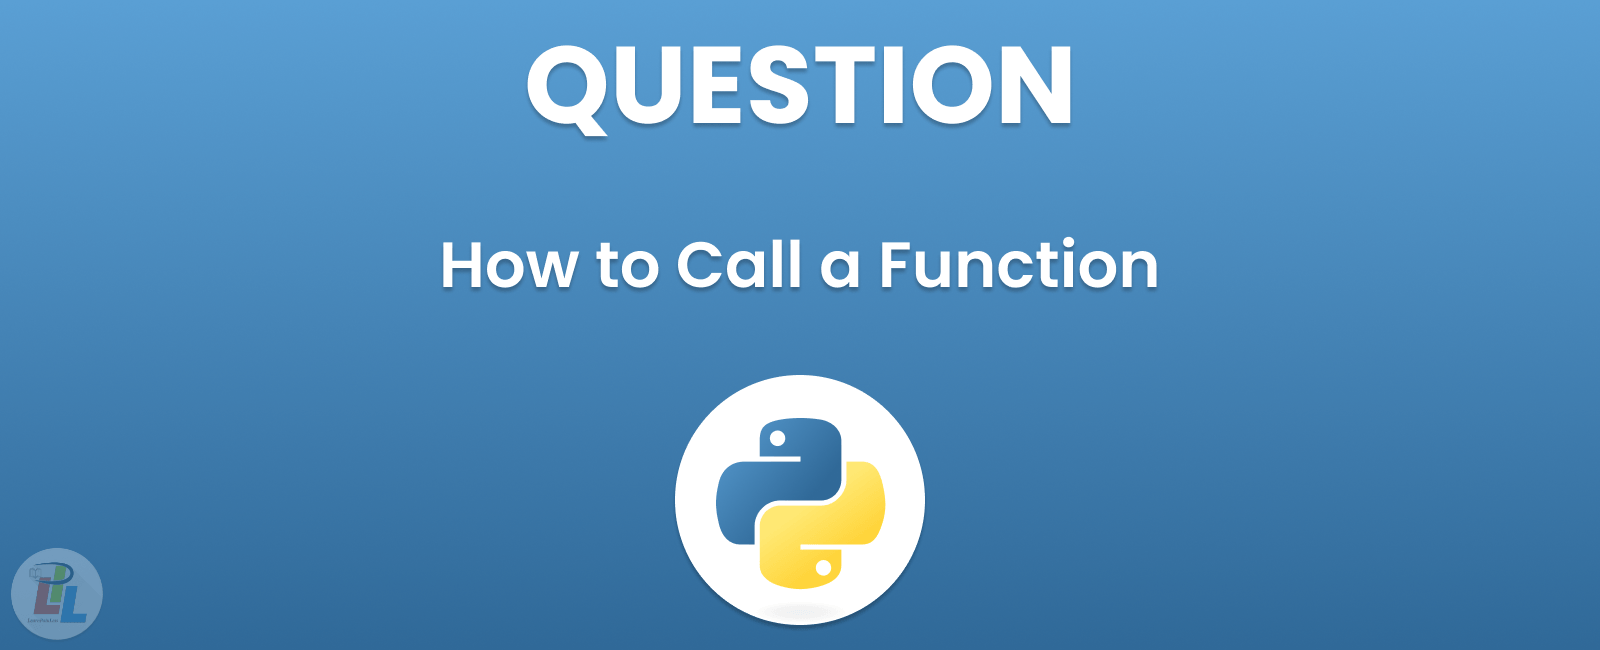 How to Call a Function in Python: A Beginner's Guide